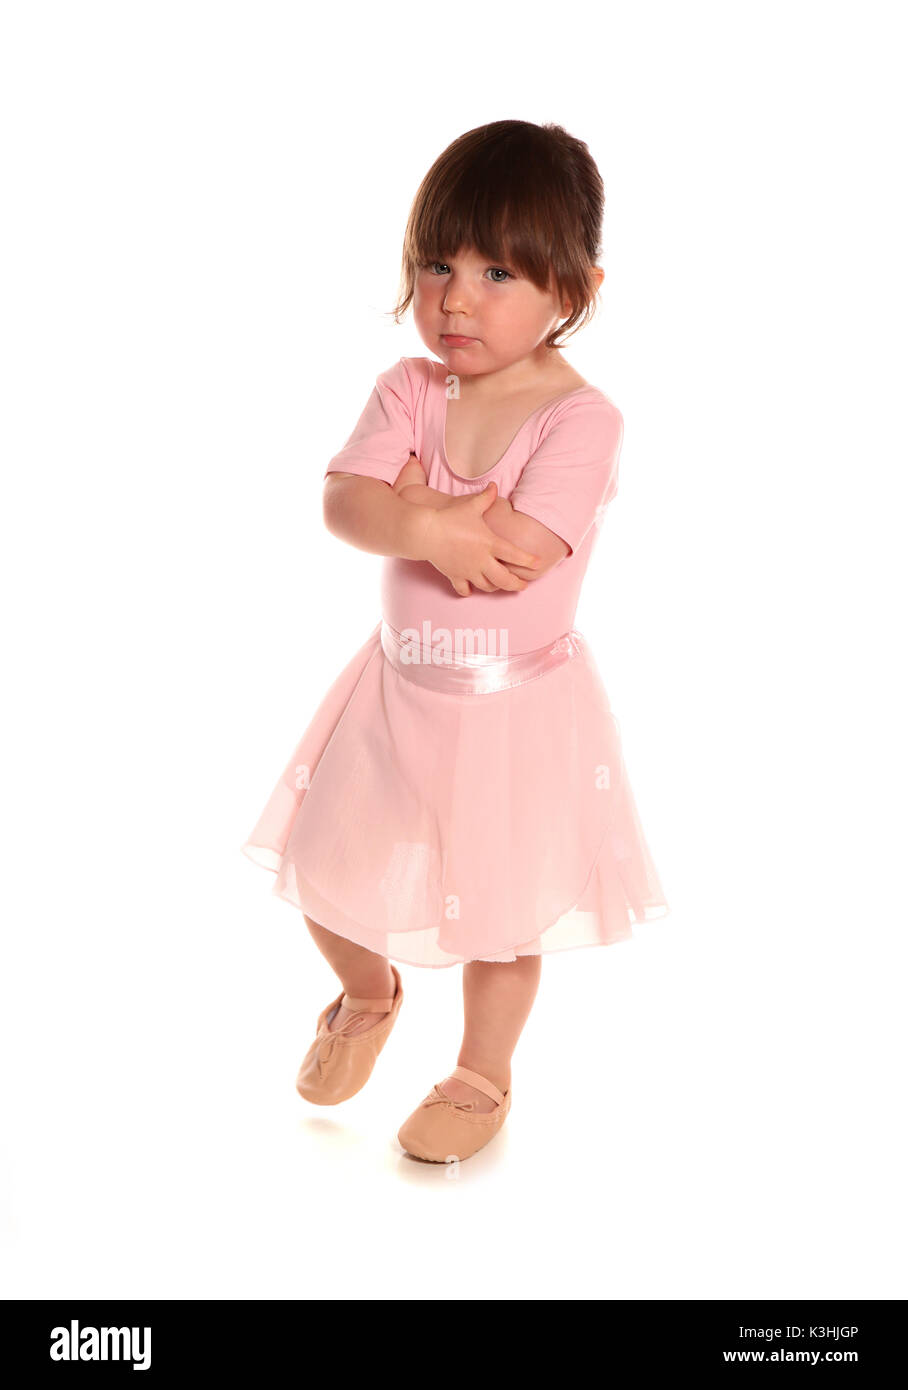 toddler in ballet outfit for dance class Stock Photo